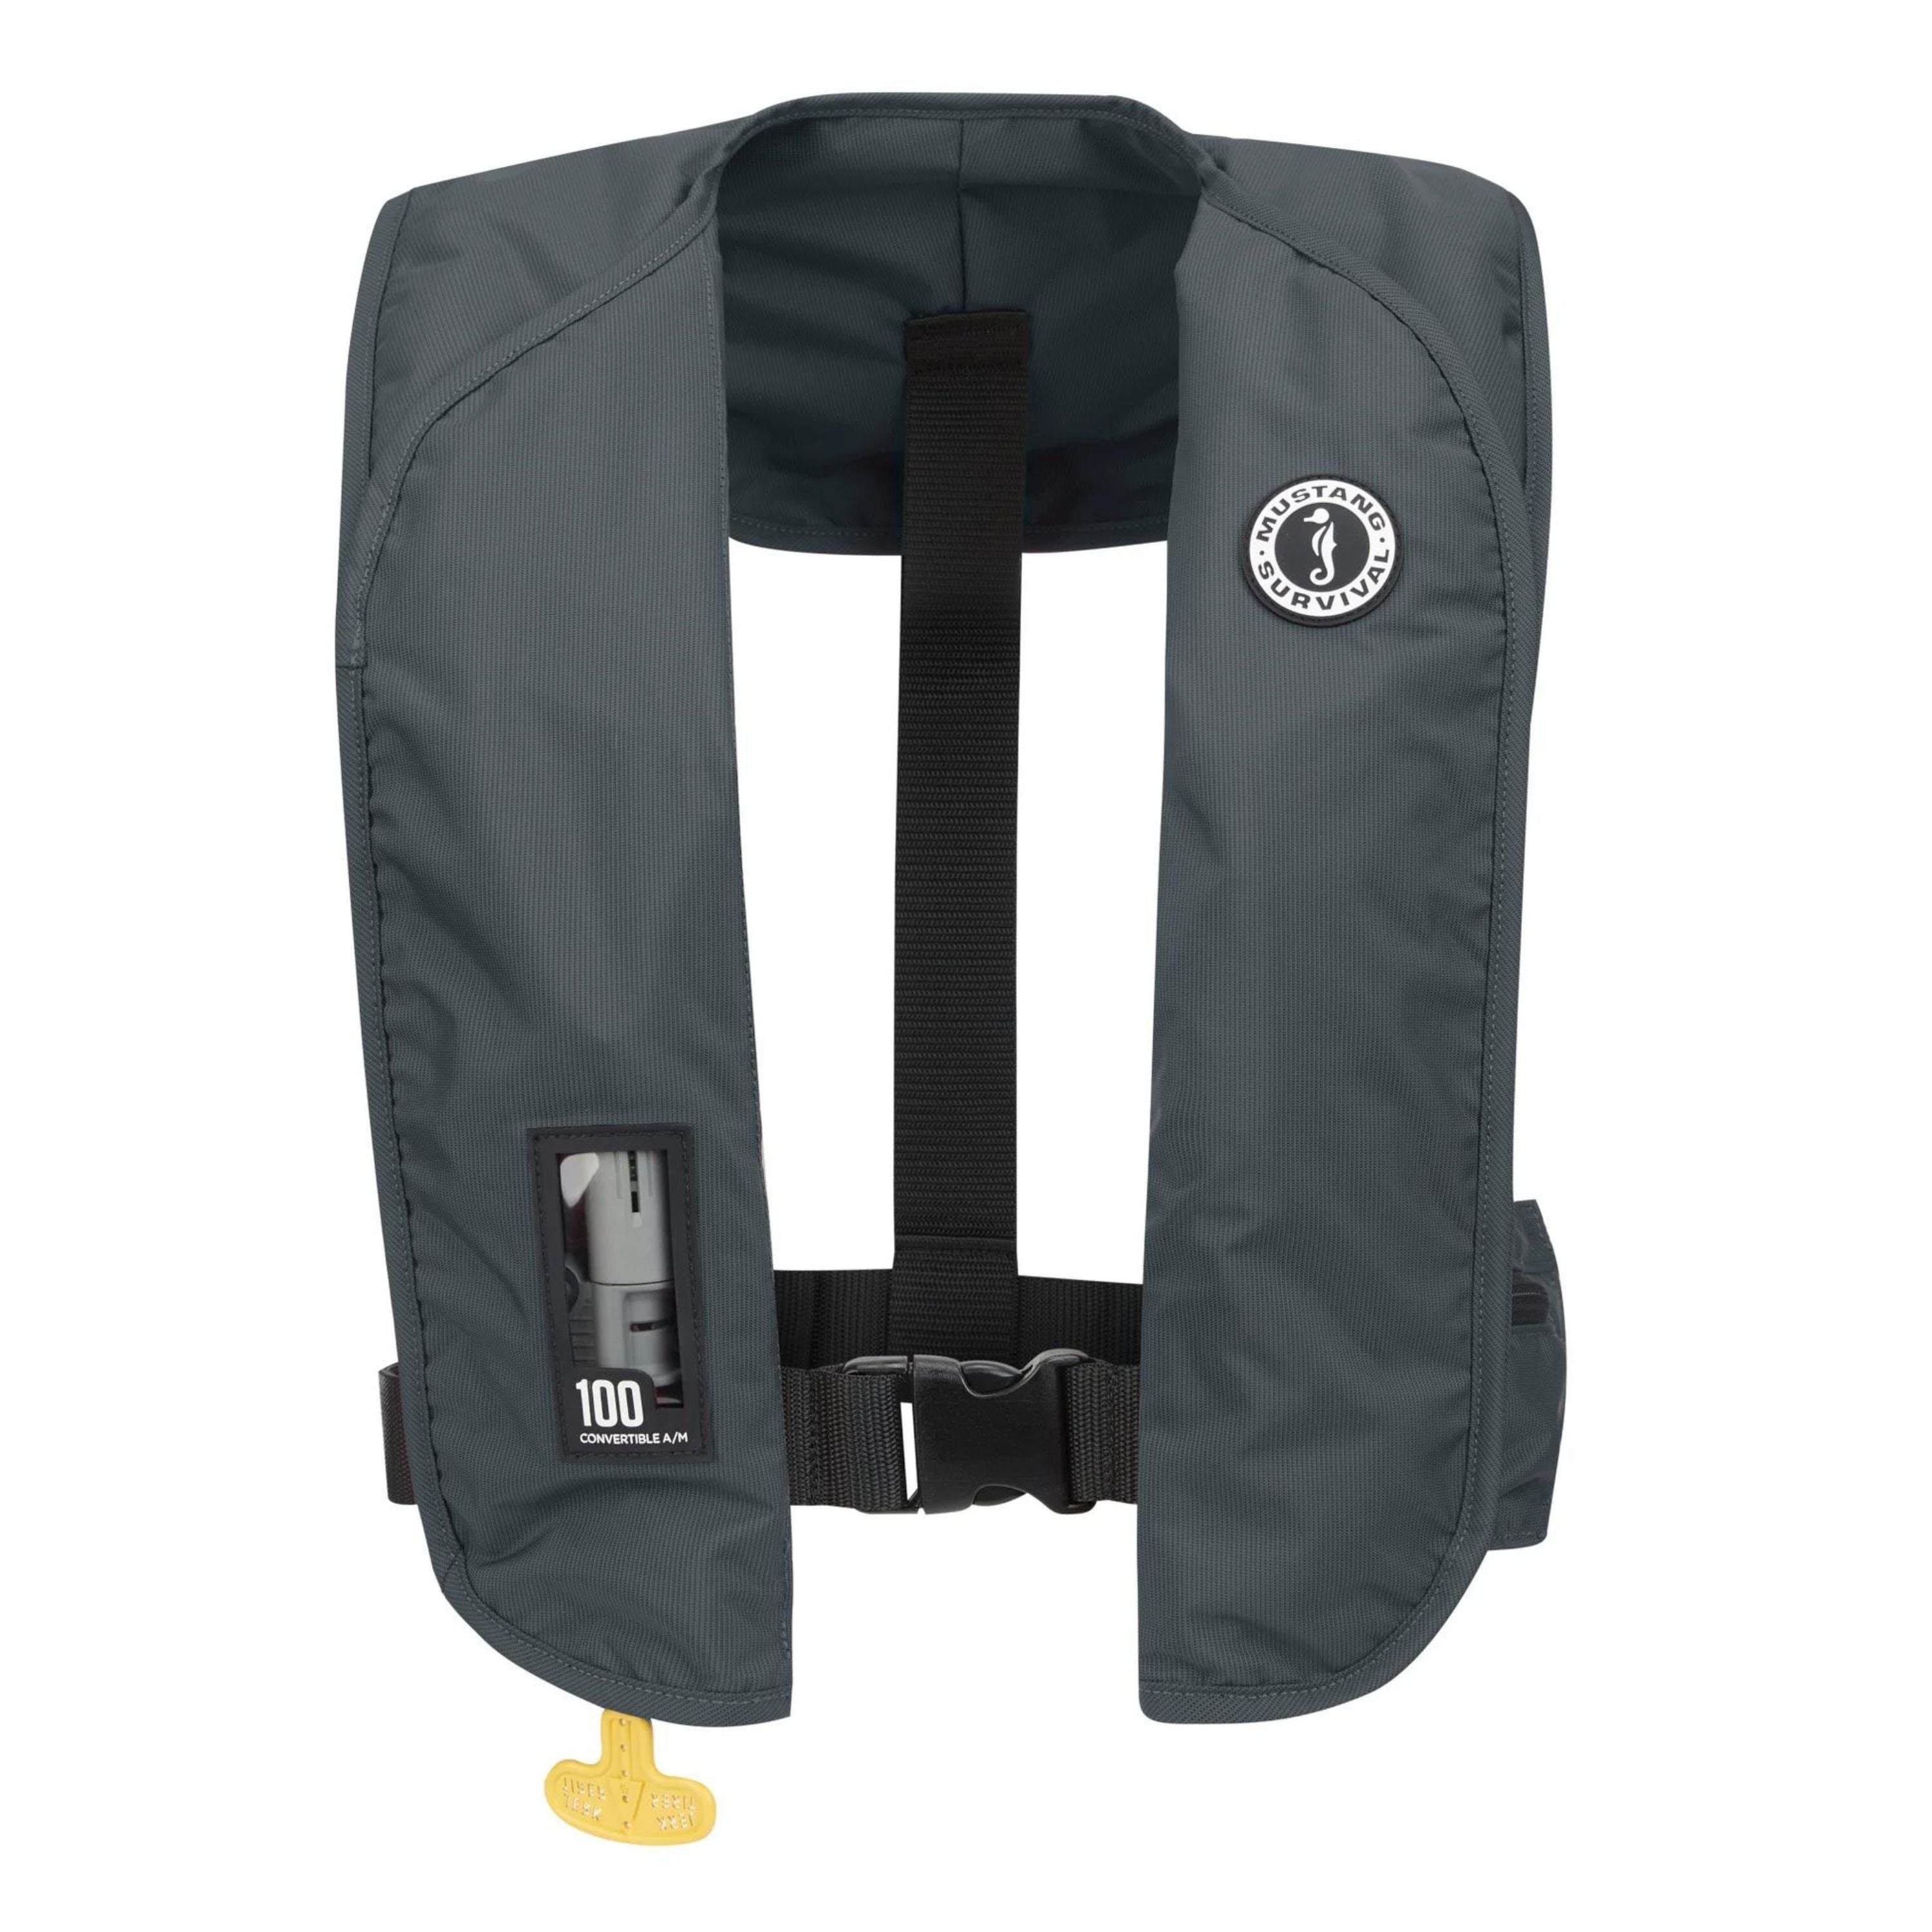 "MIT 100" inflatable PFD convertible automatic/manual